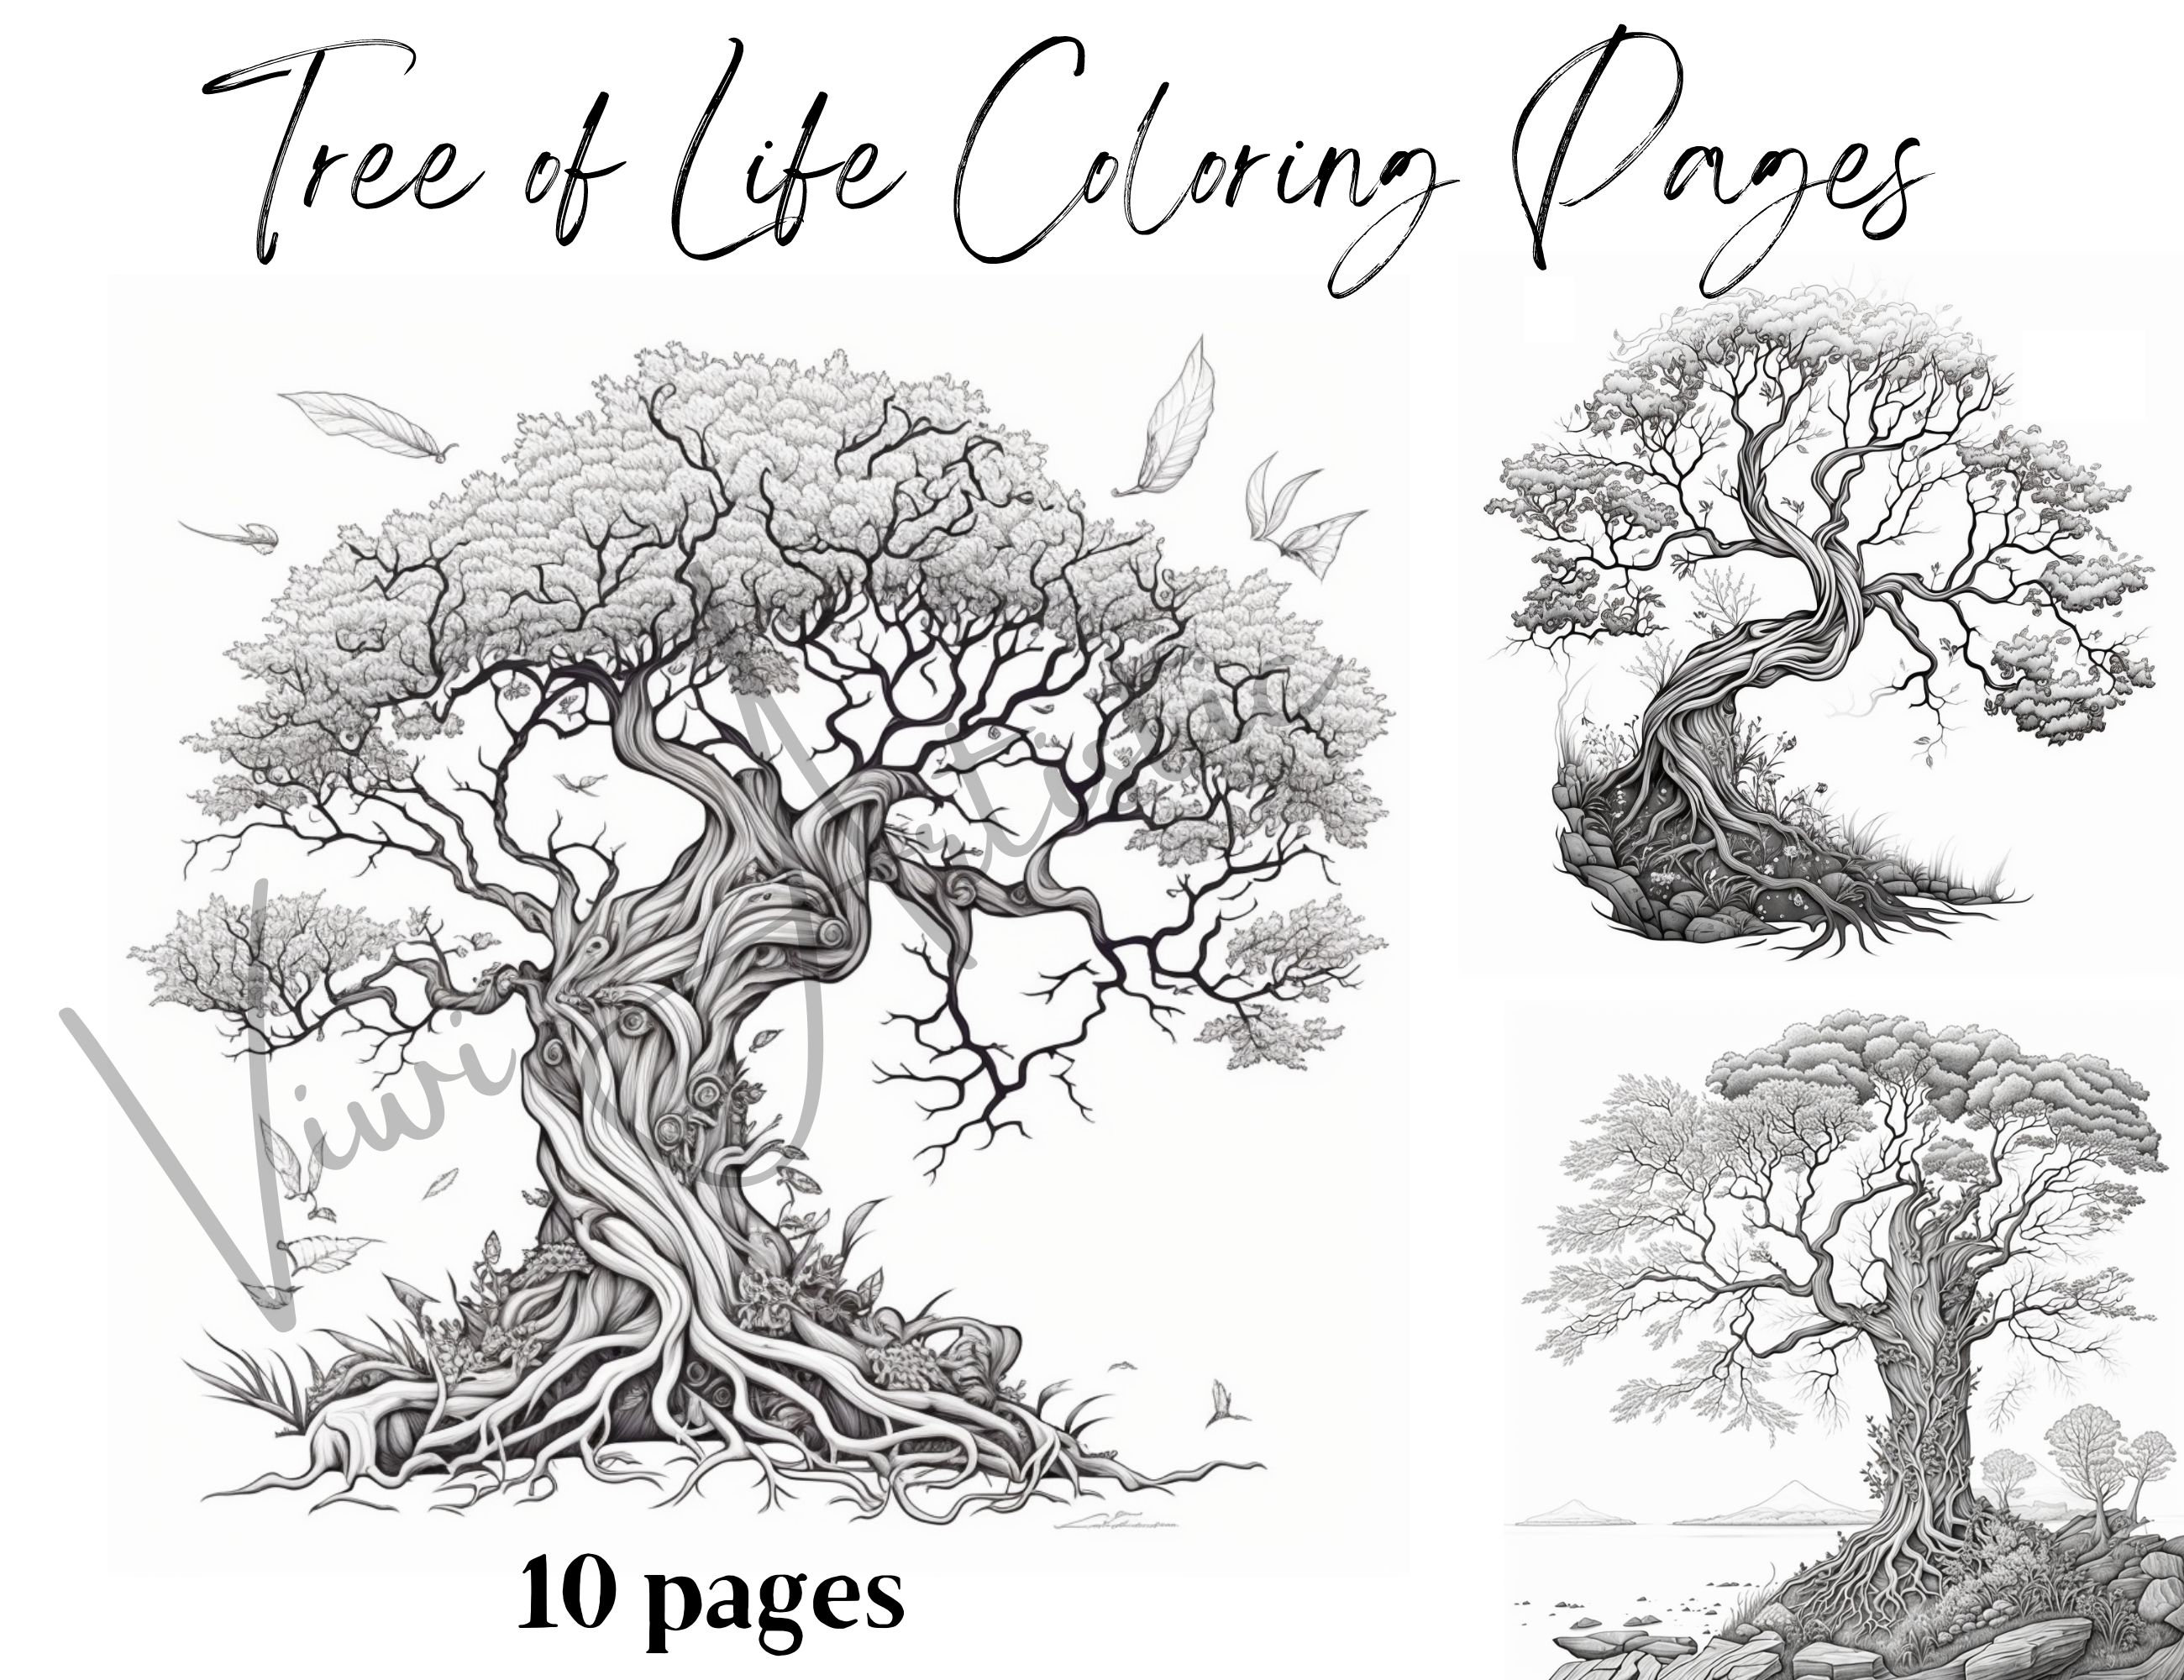 Tree of life coloring pages coloring pages for adult tree coloring pages